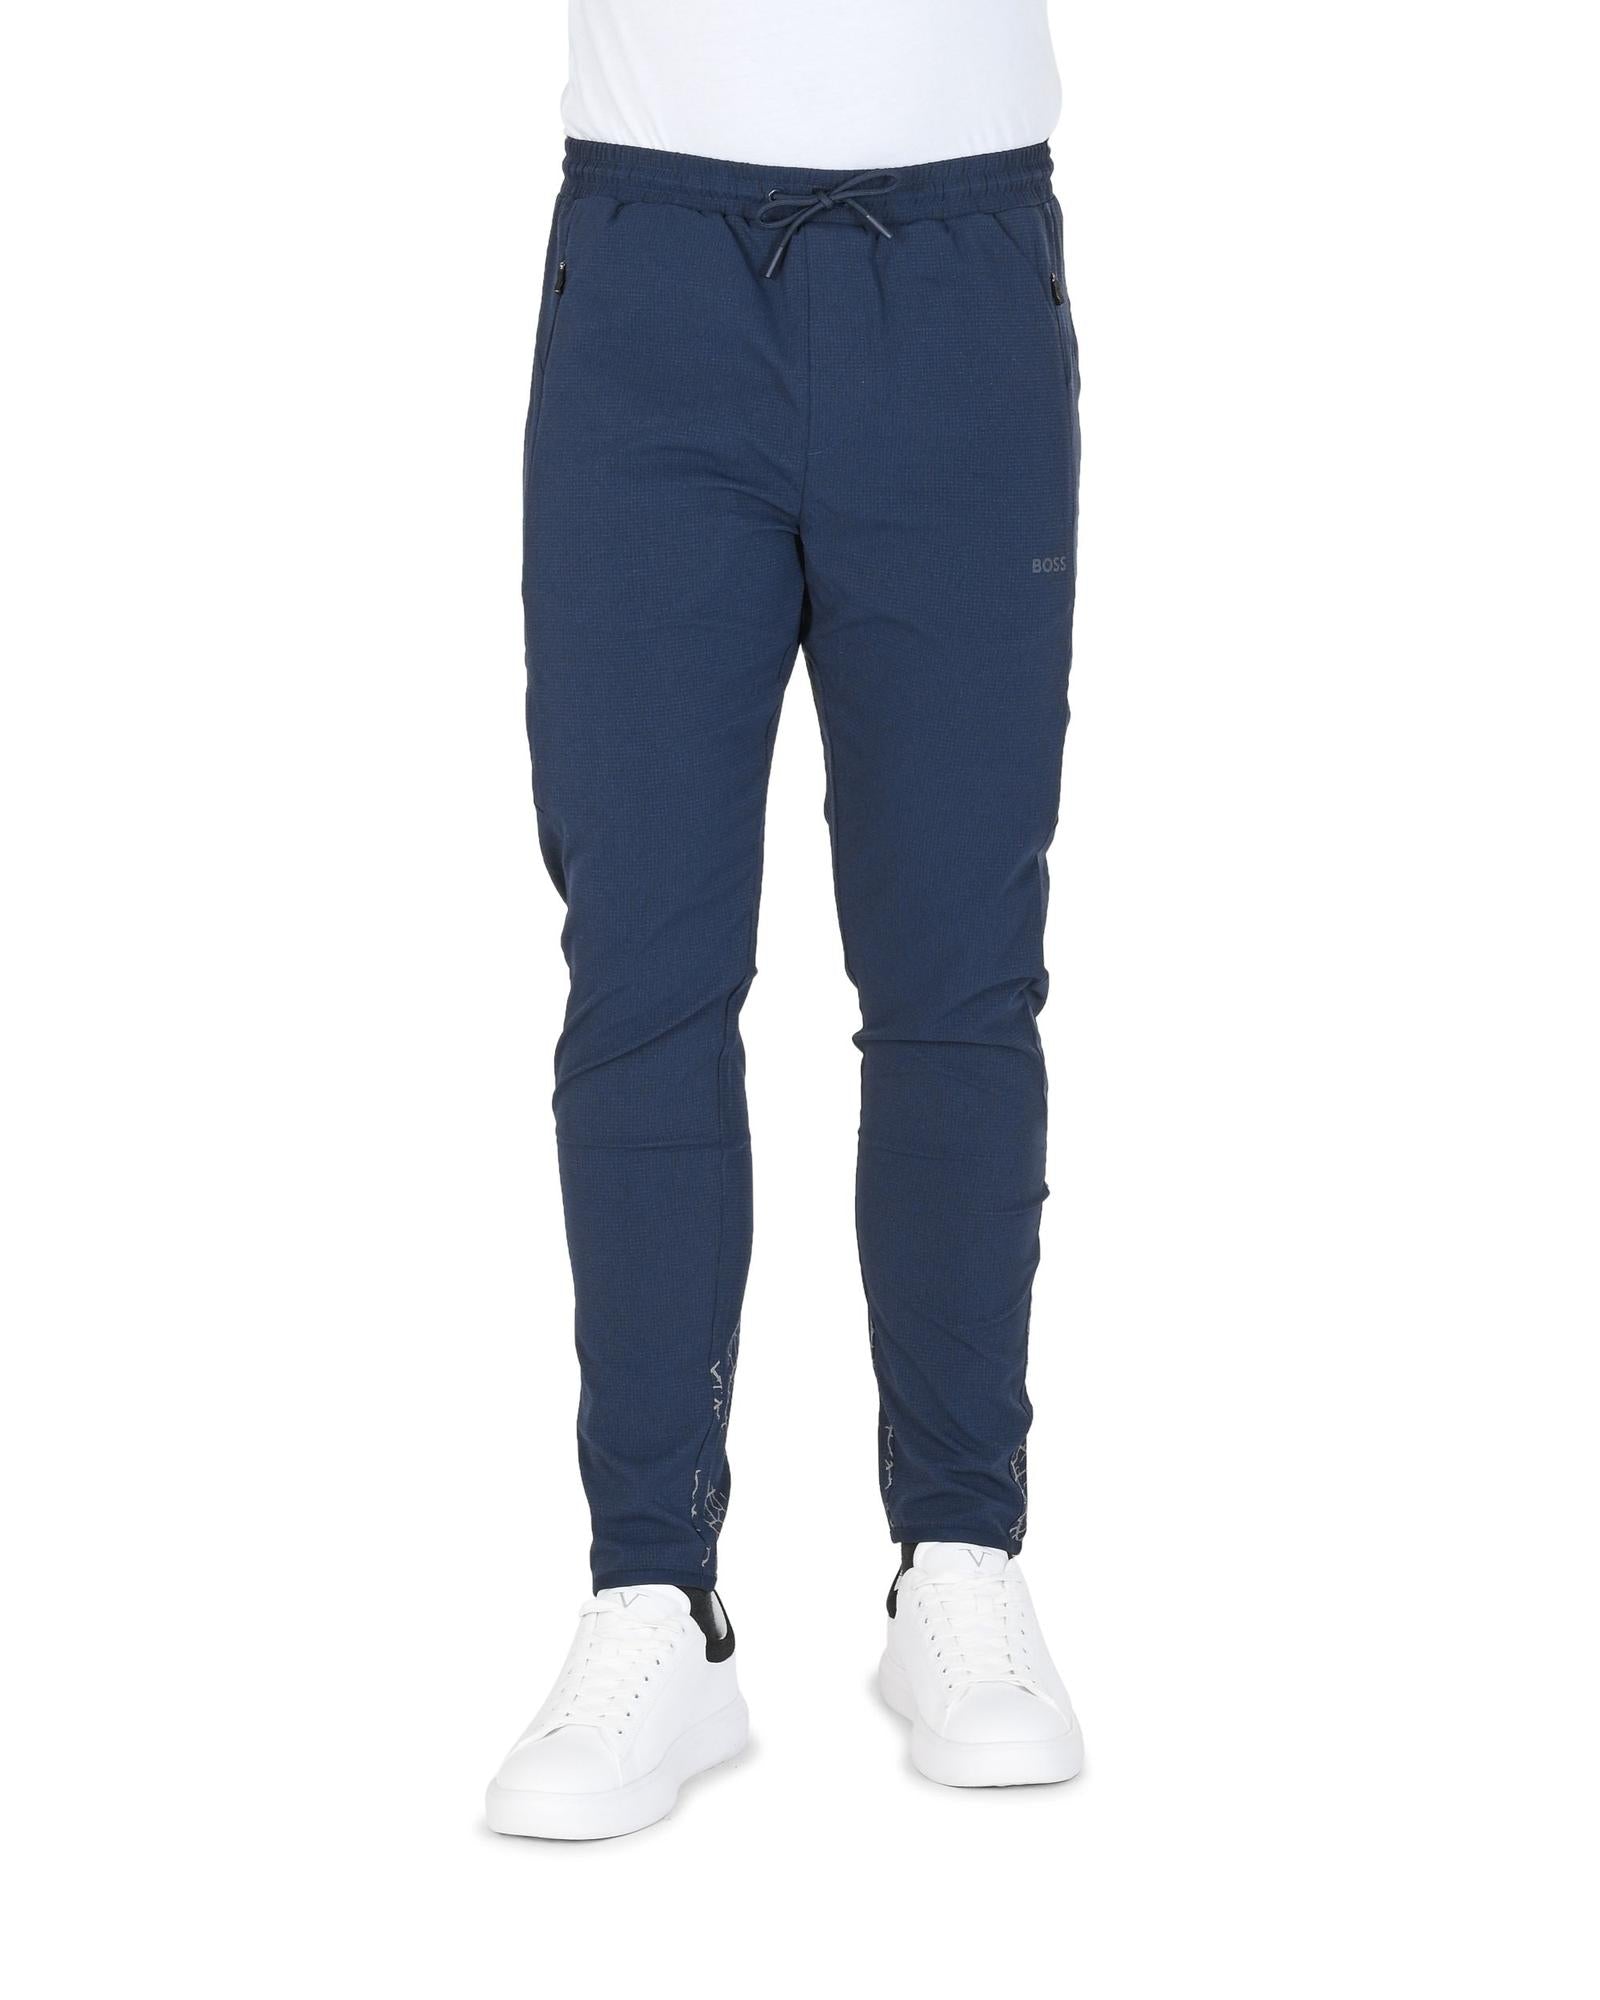 Men's Recycled Polyester Navy Pants in Navy blue - M